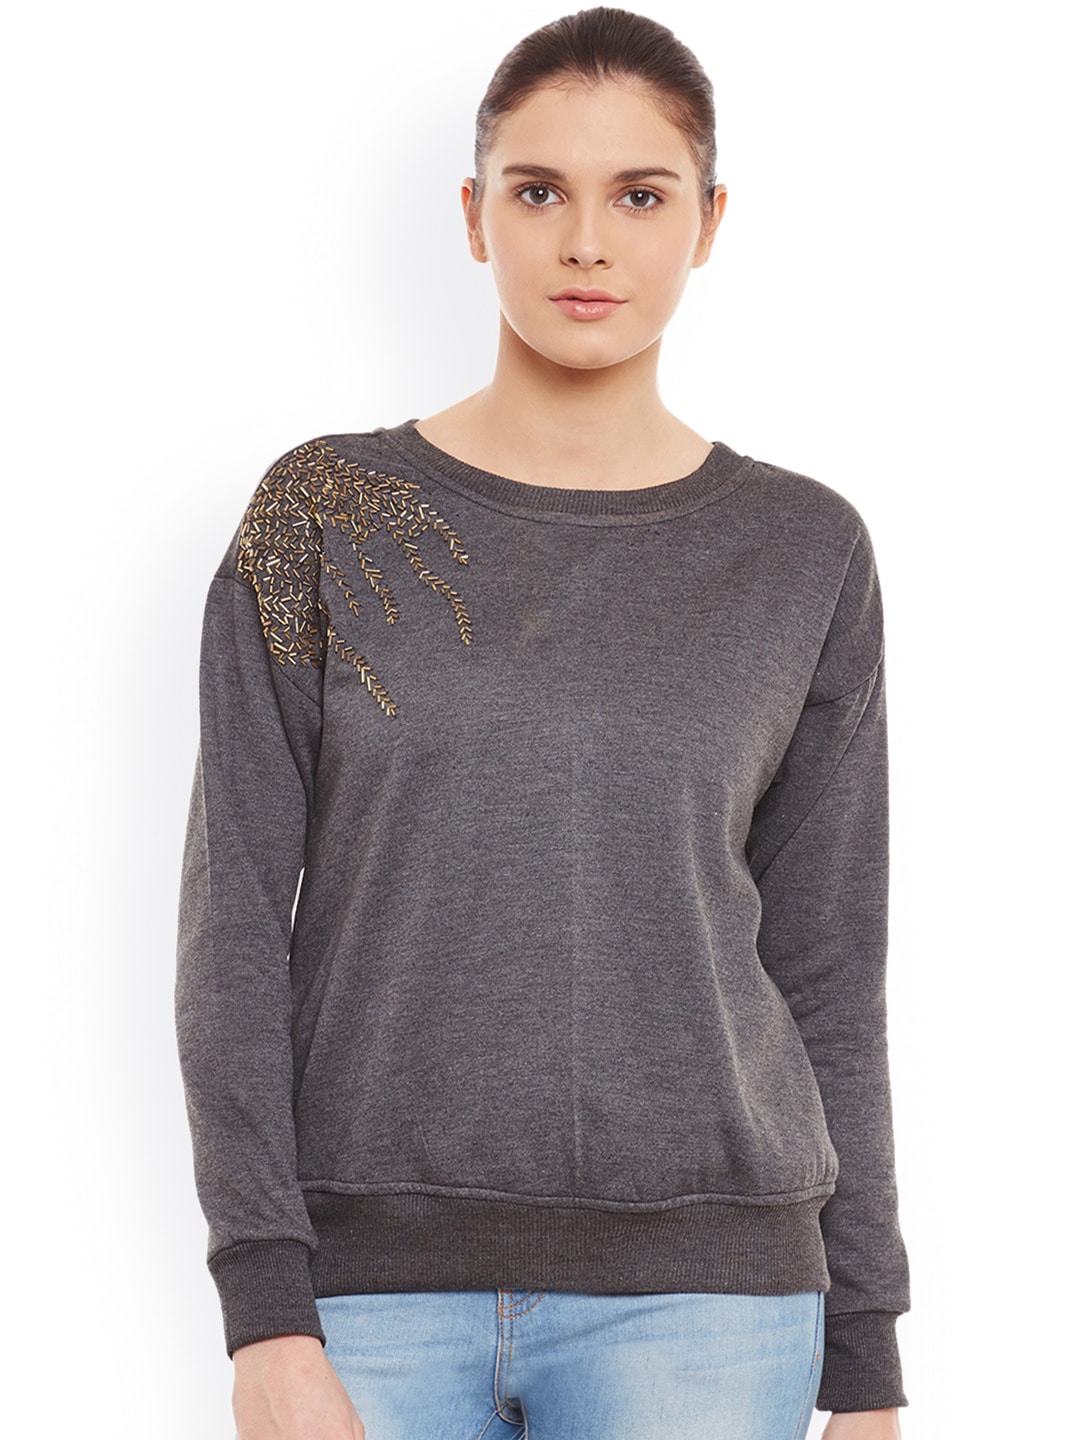 Belle Fille Grey Sweatshirt with Embellished Detail Price in India